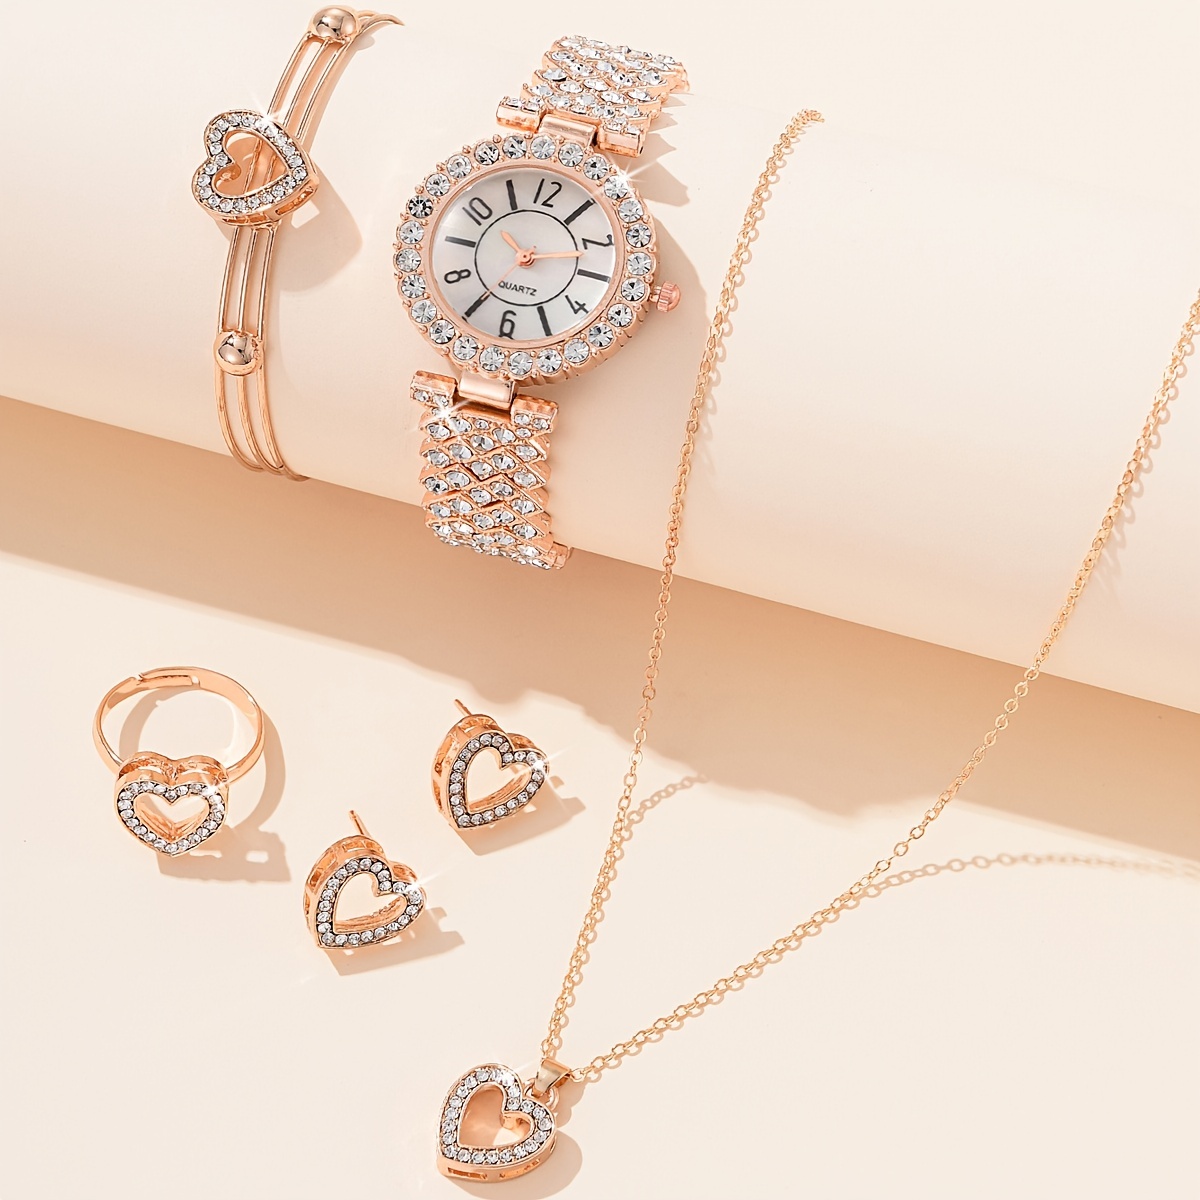 Fervor jewelry and watch set All the accessories you need for any